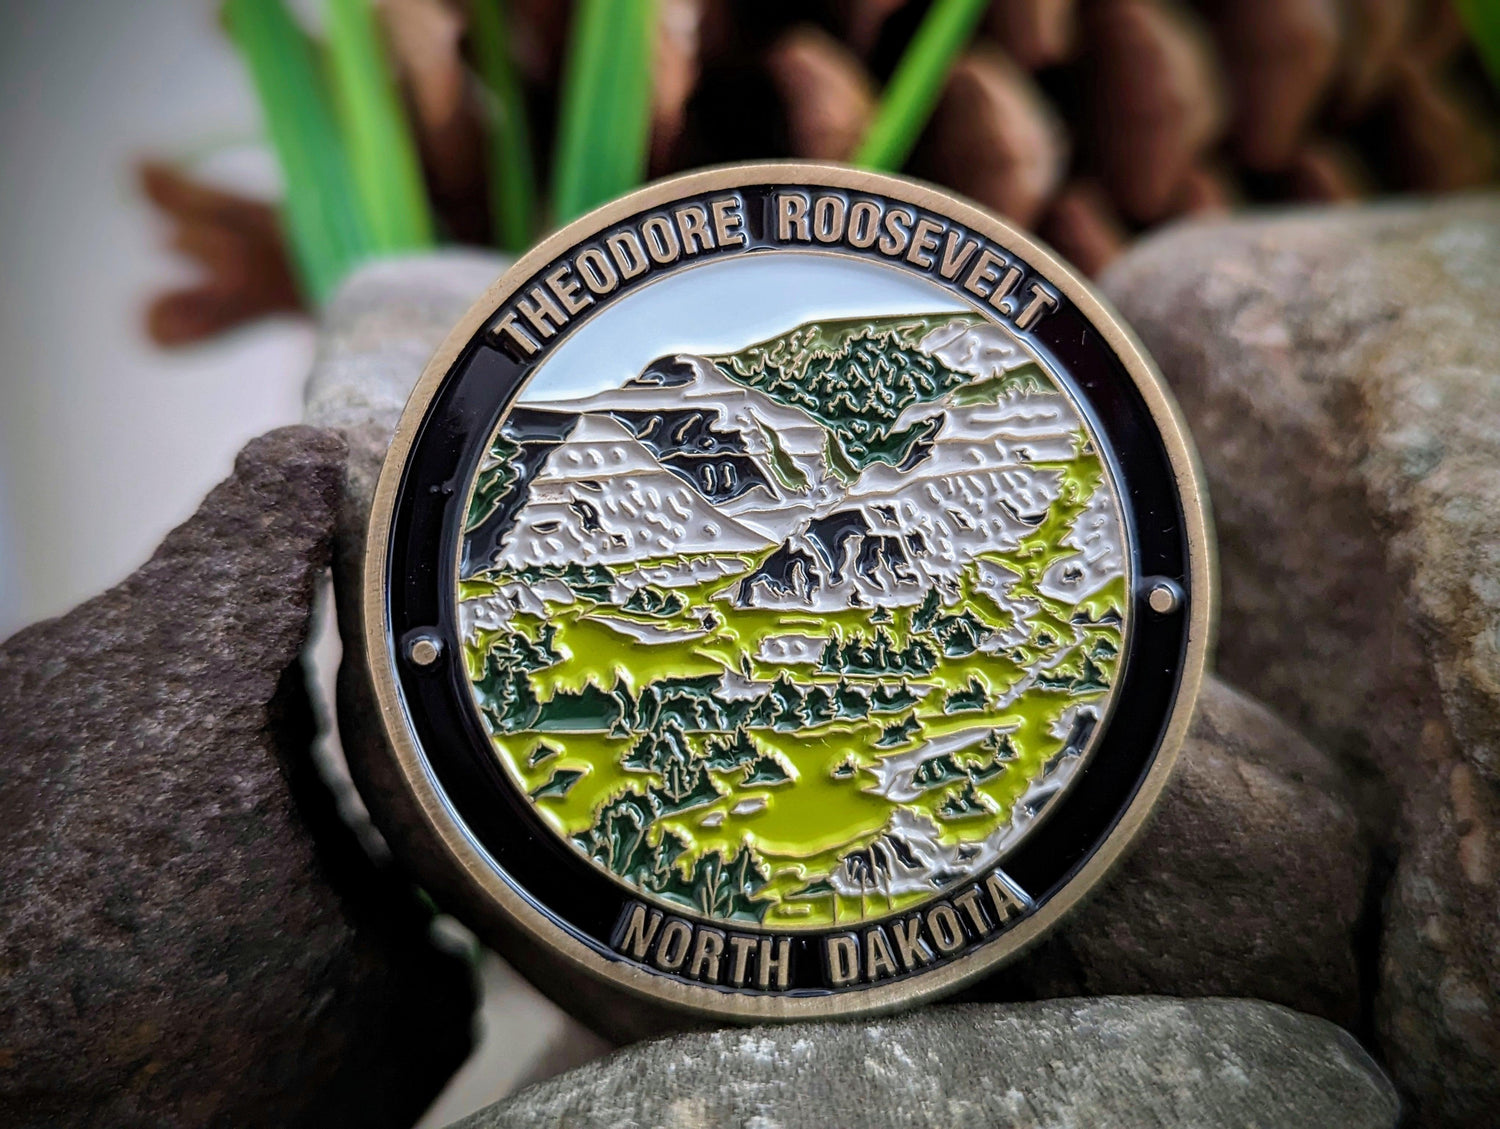 THEODORE ROOSEVELT NATIONAL PARK CHALLENGE COIN